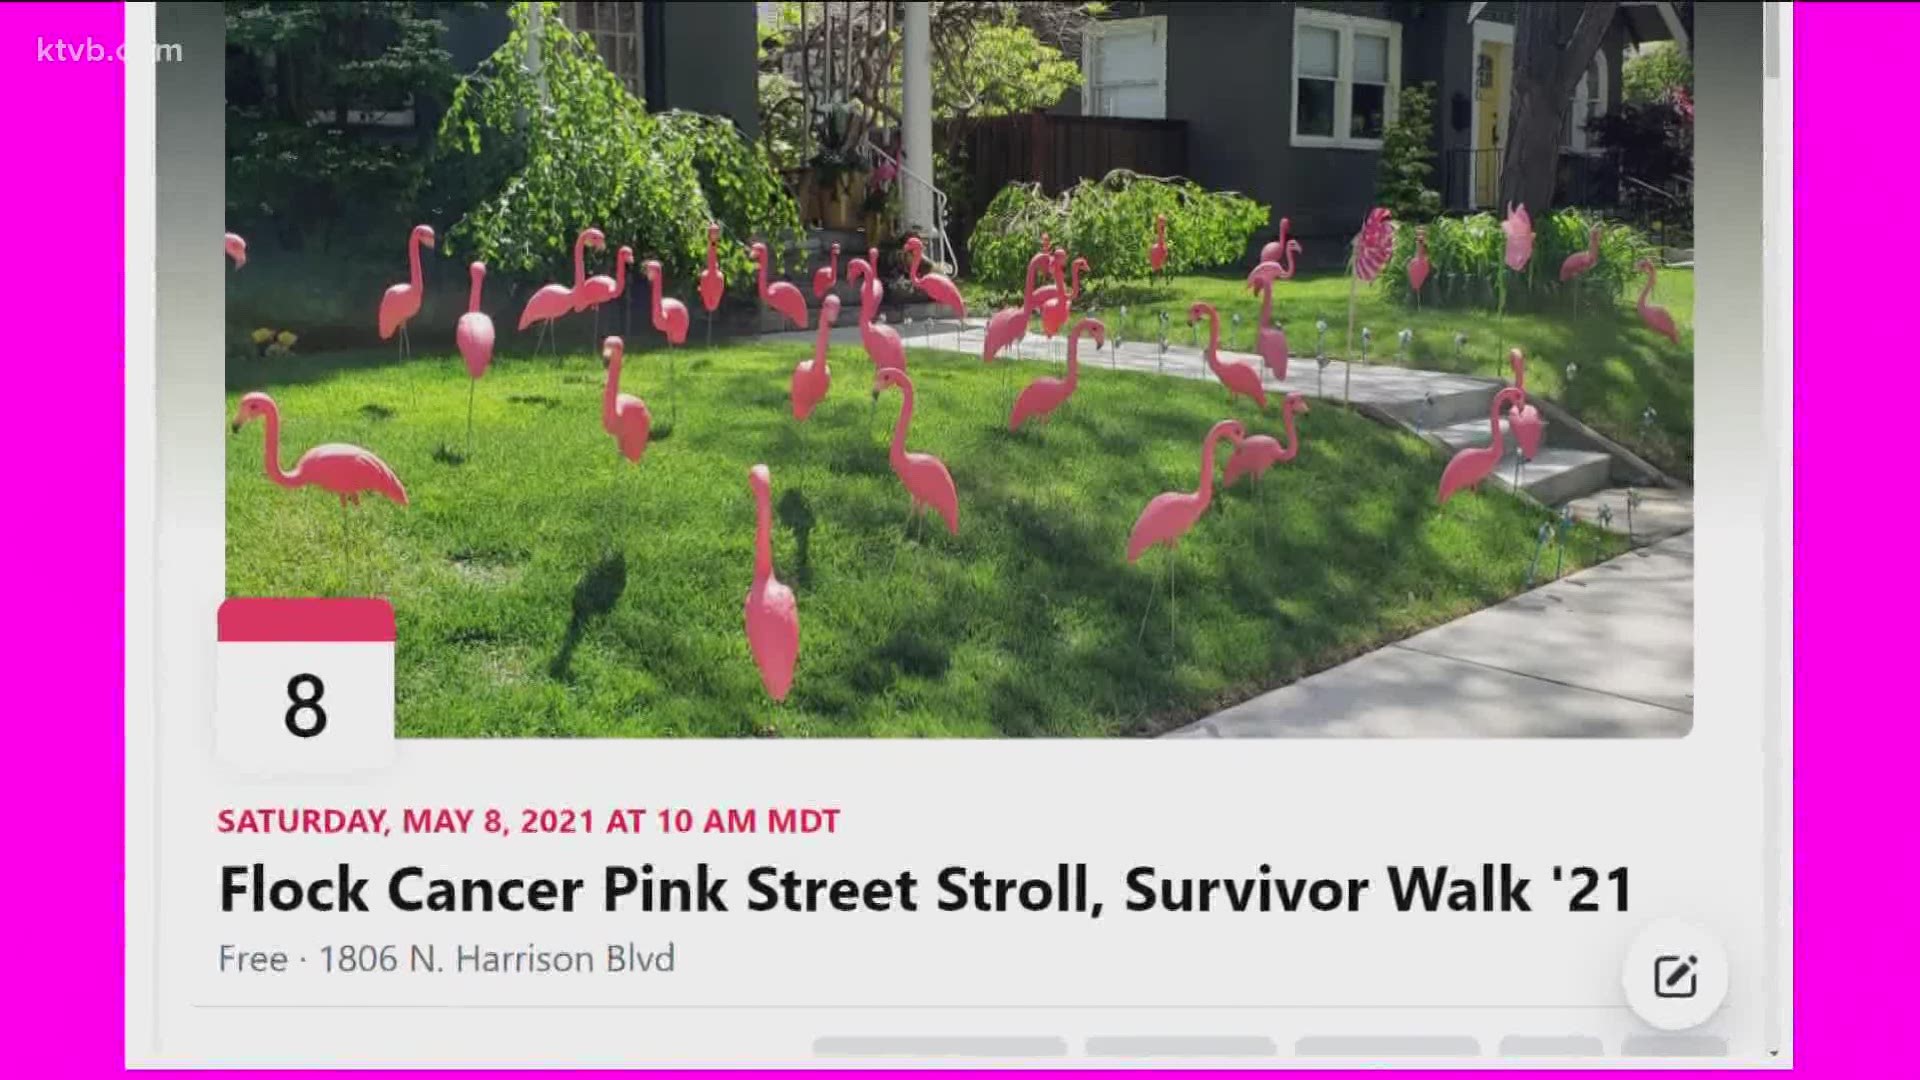 The Flock Cancer Pink Street Stroll will be hosted by the mother-daughter duo Barbara Rhoades and Leslie Scantling, both of whom are survivors of breast cancer.